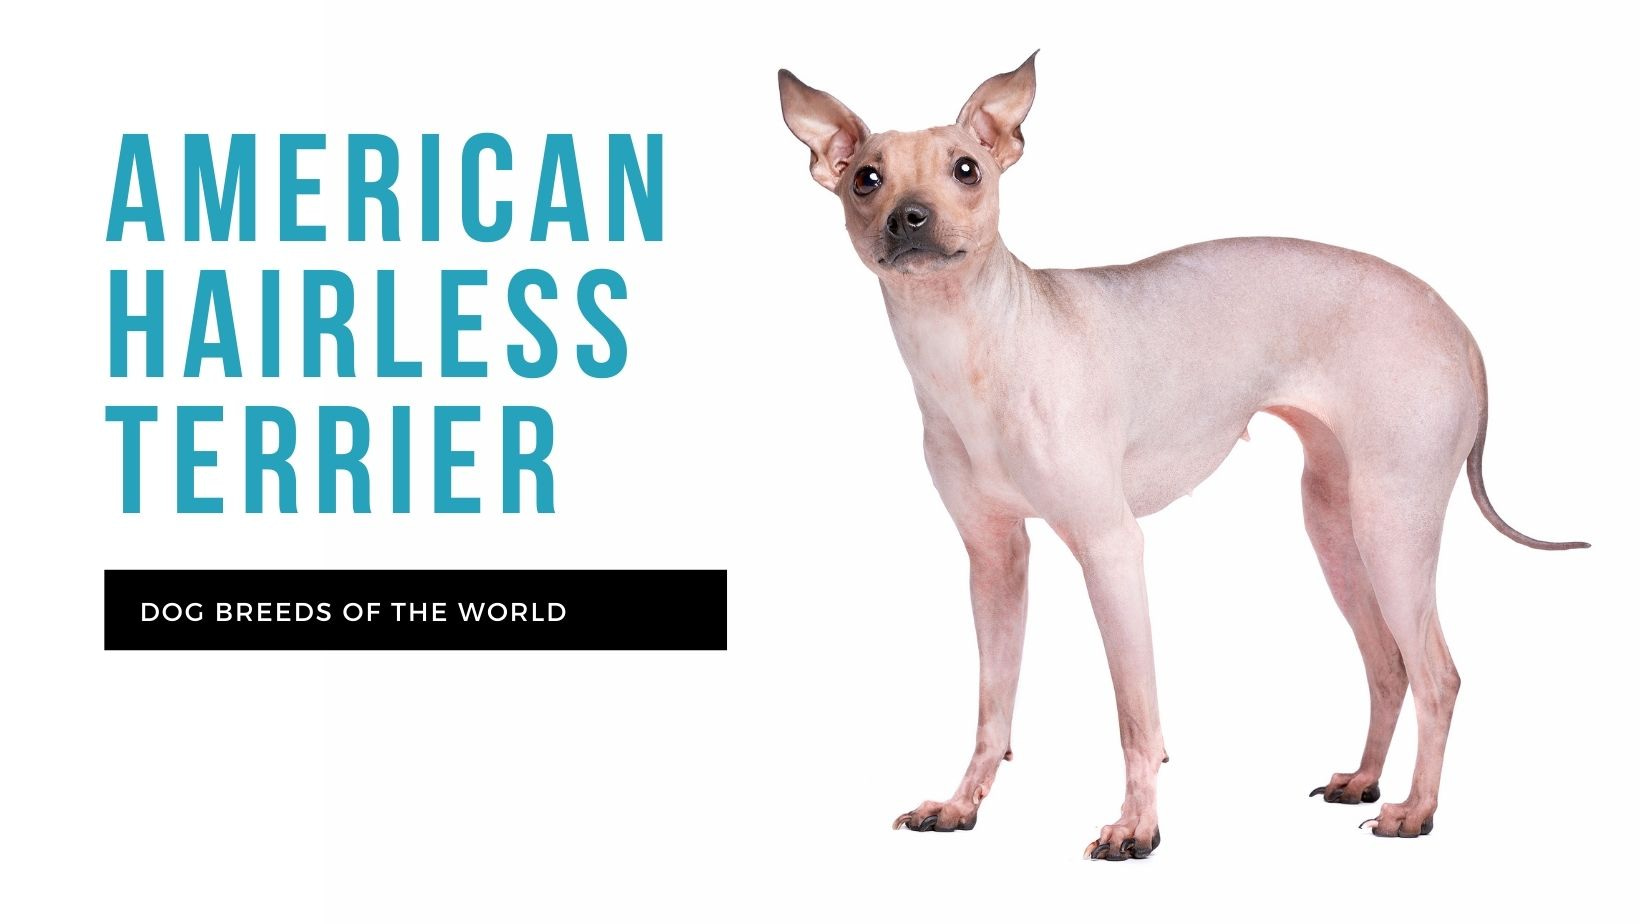 <strong>American hairless terrier</strong>